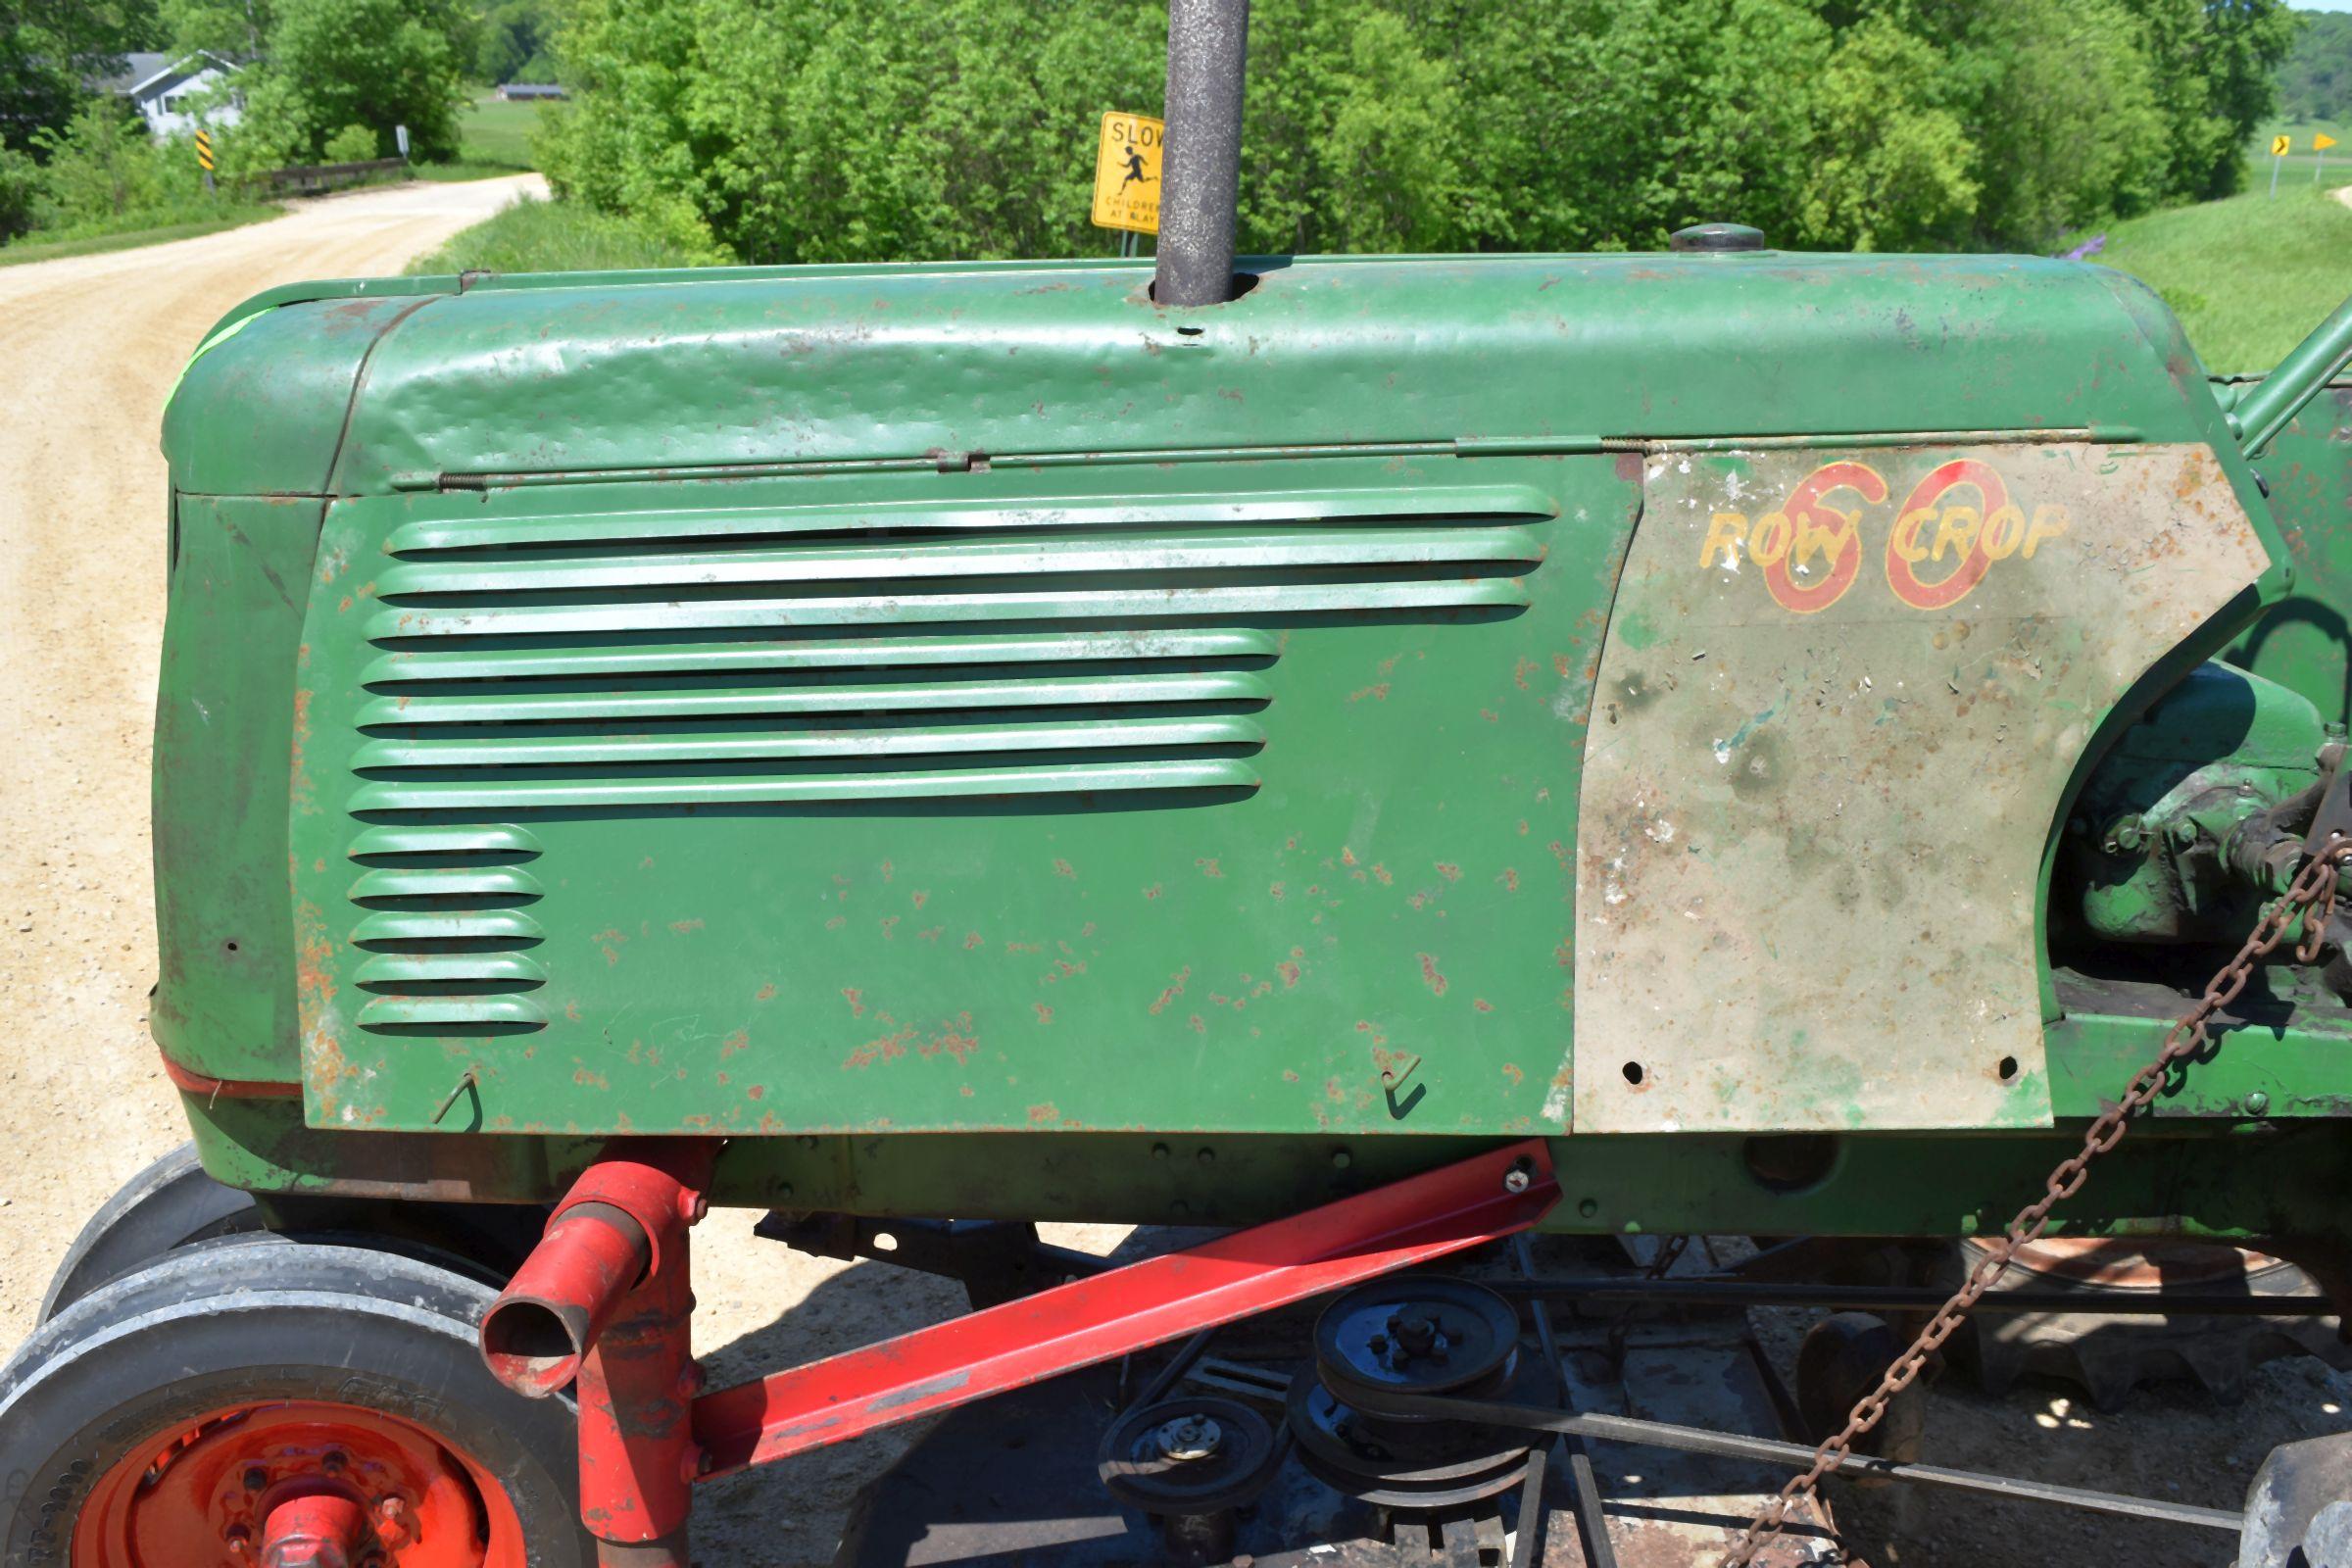 Oliver 60 Row Crop Tractor, Narrow Front, 11.2x36 Tires, Inside Wheel Weights, Clam Shell Fenders, S